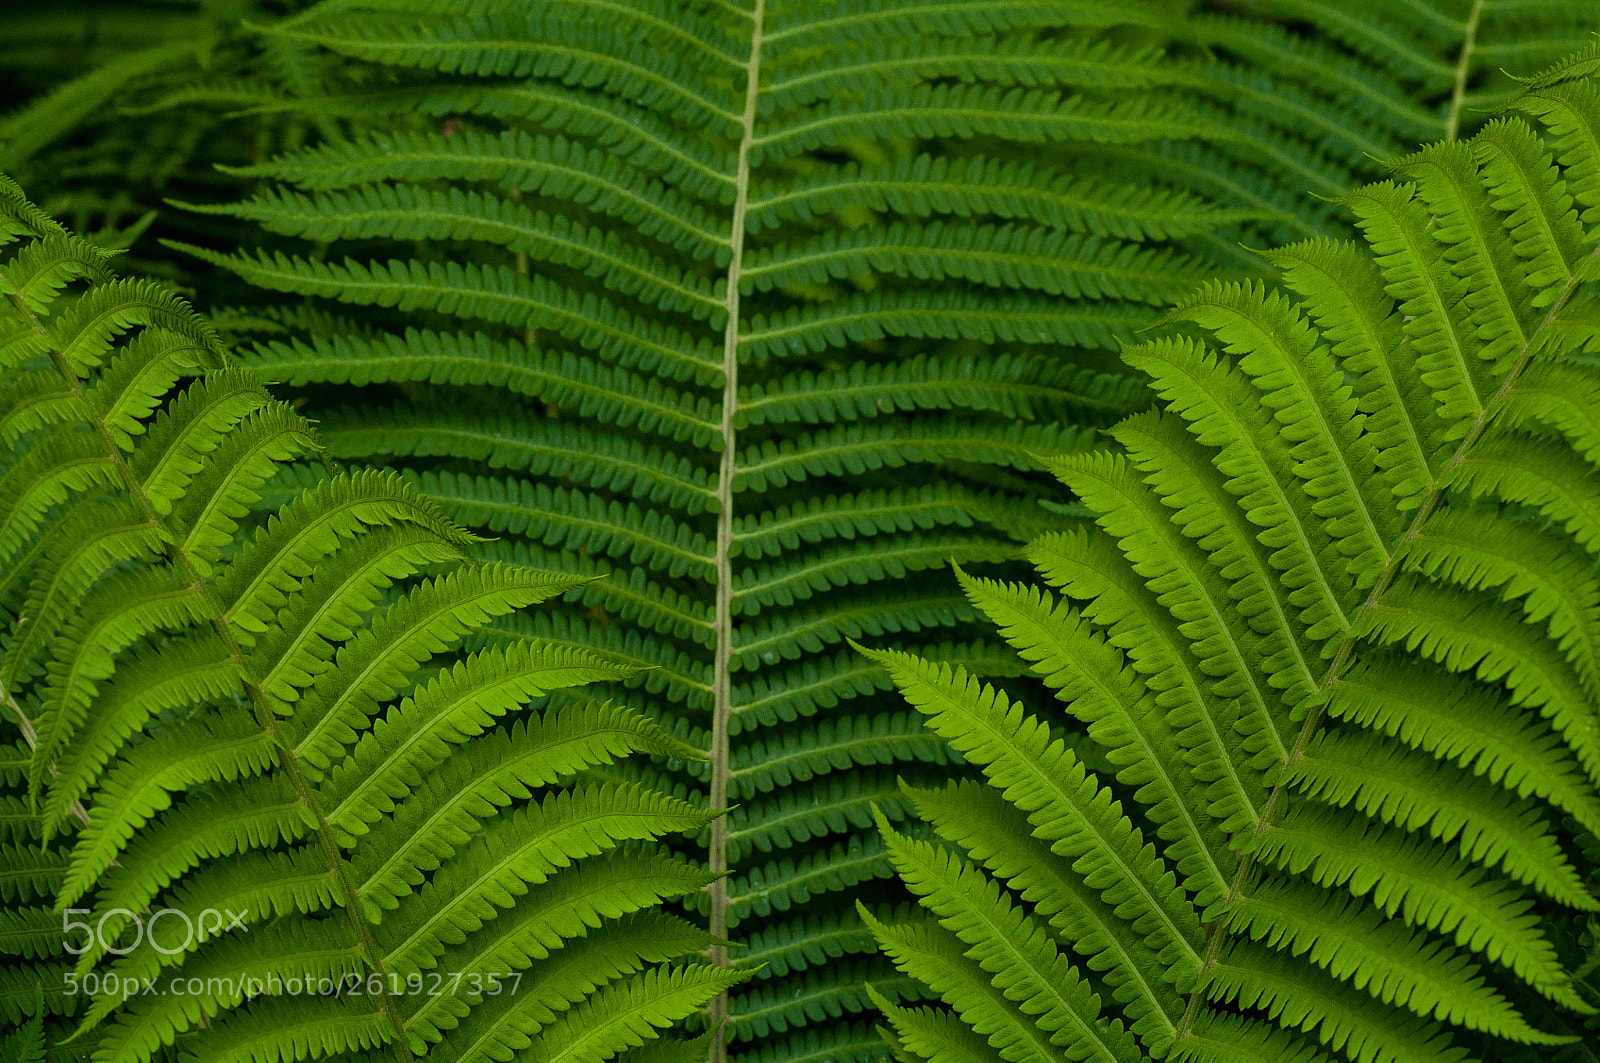 Nikon D90 sample photo. Ferns fanning out photography